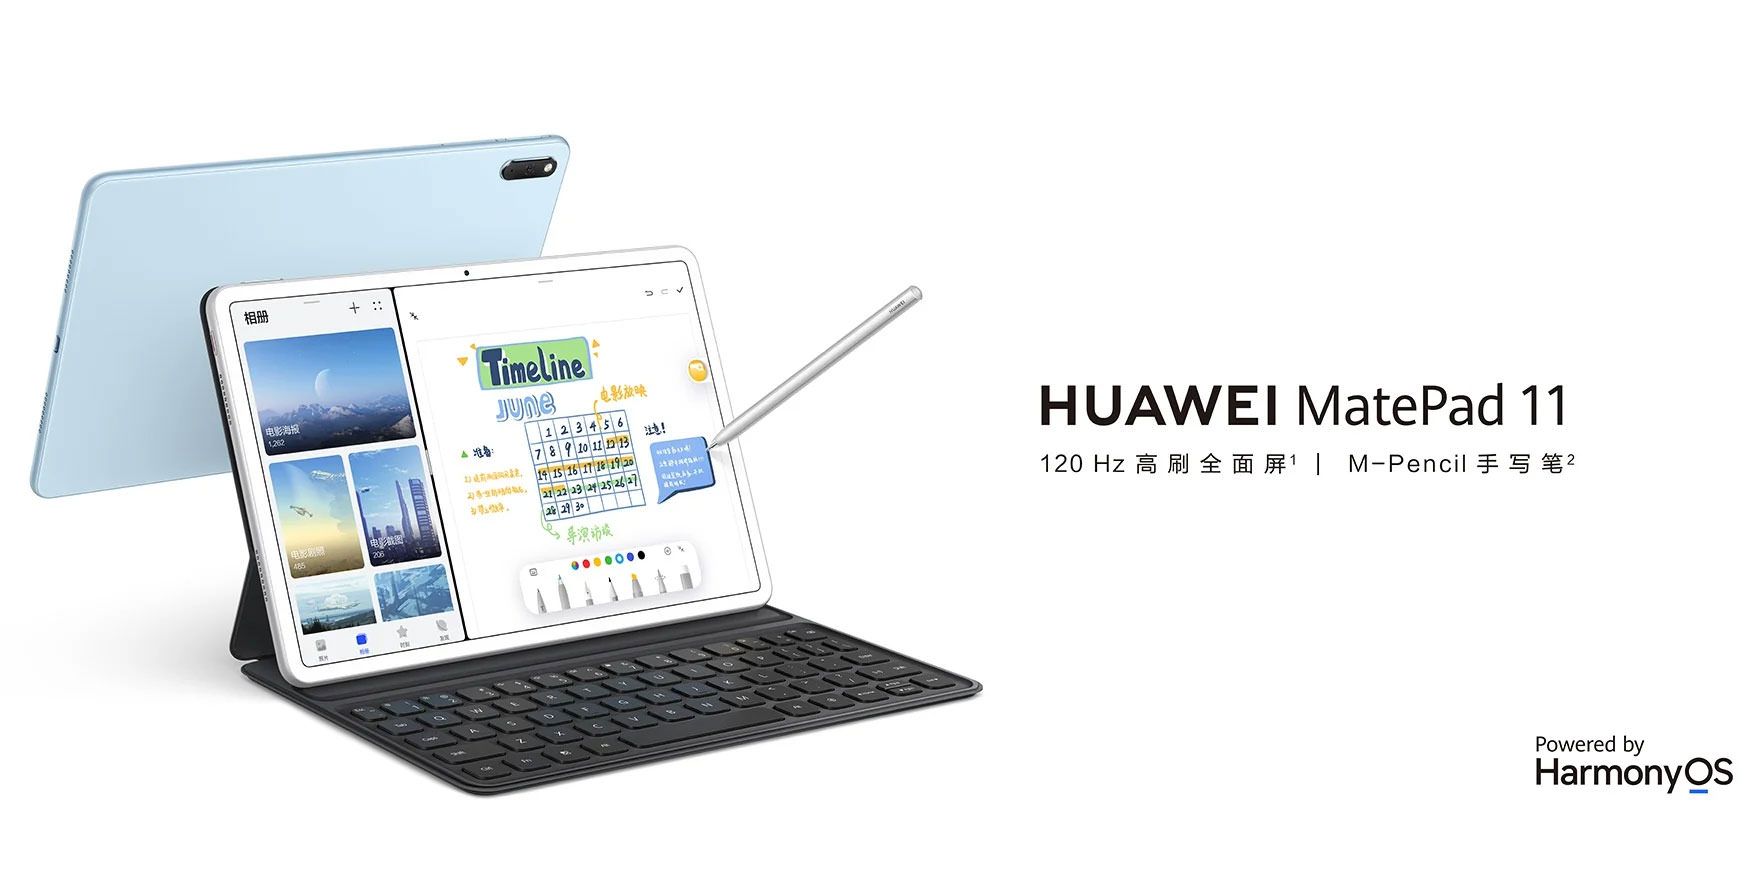 Huawei Mate Pad 11 front view